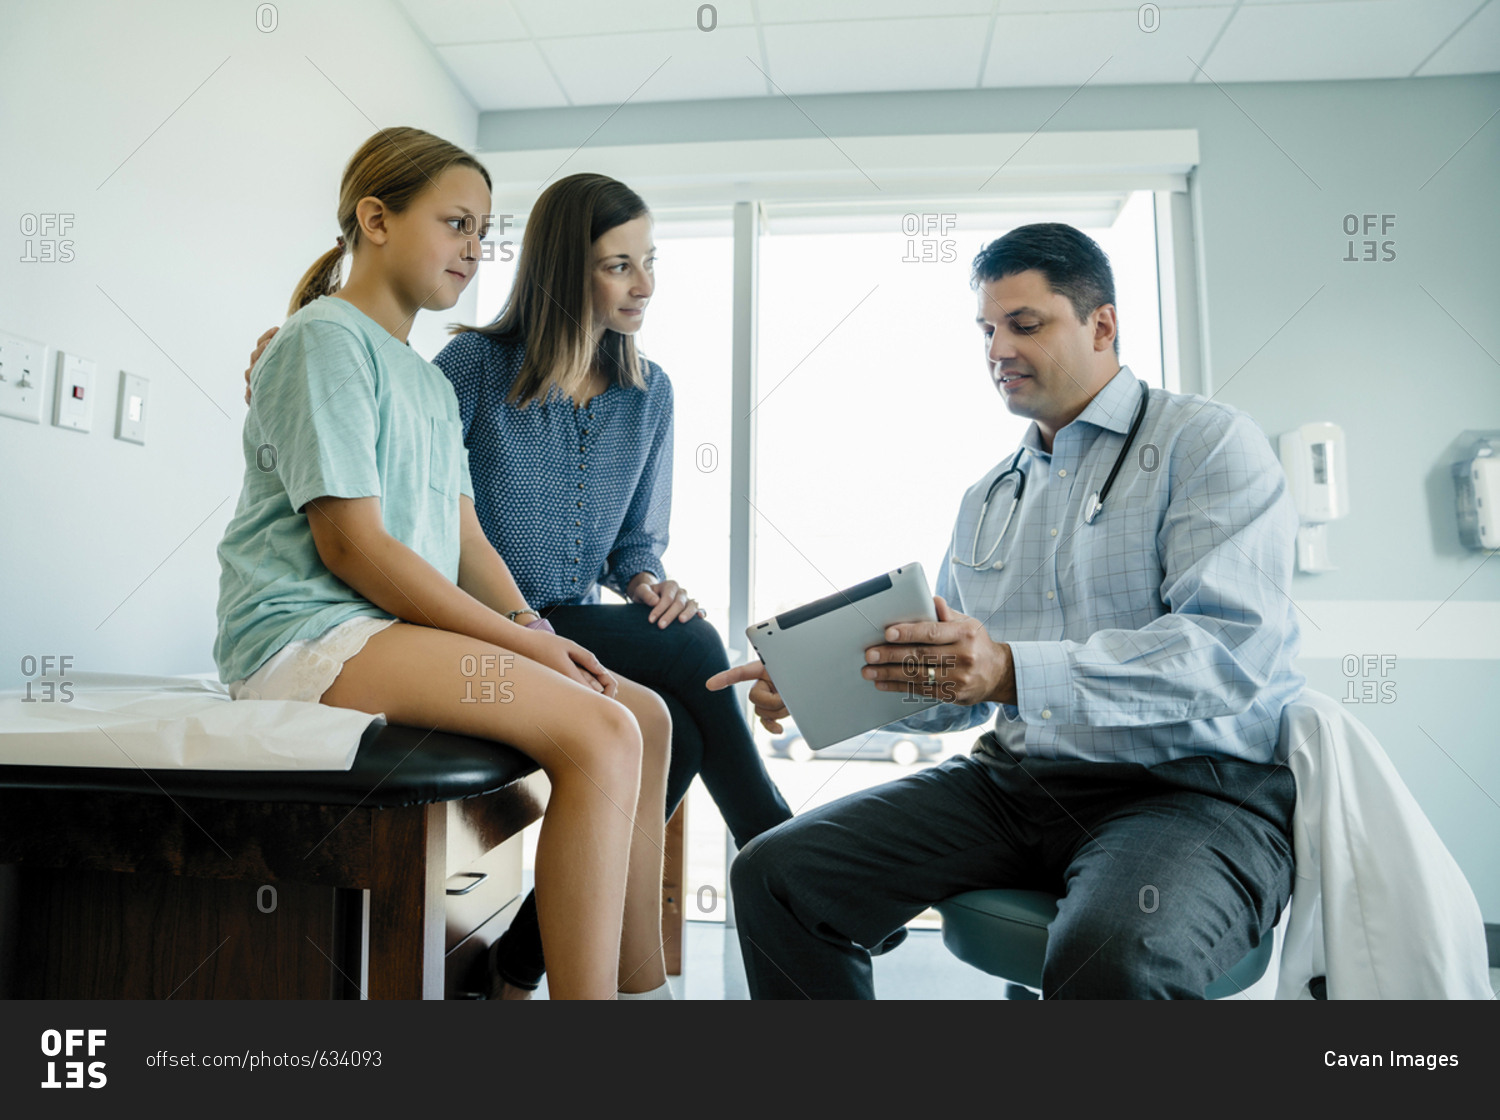 Pediatrician discussing over tablet computer with mother and daughter in medical examination room